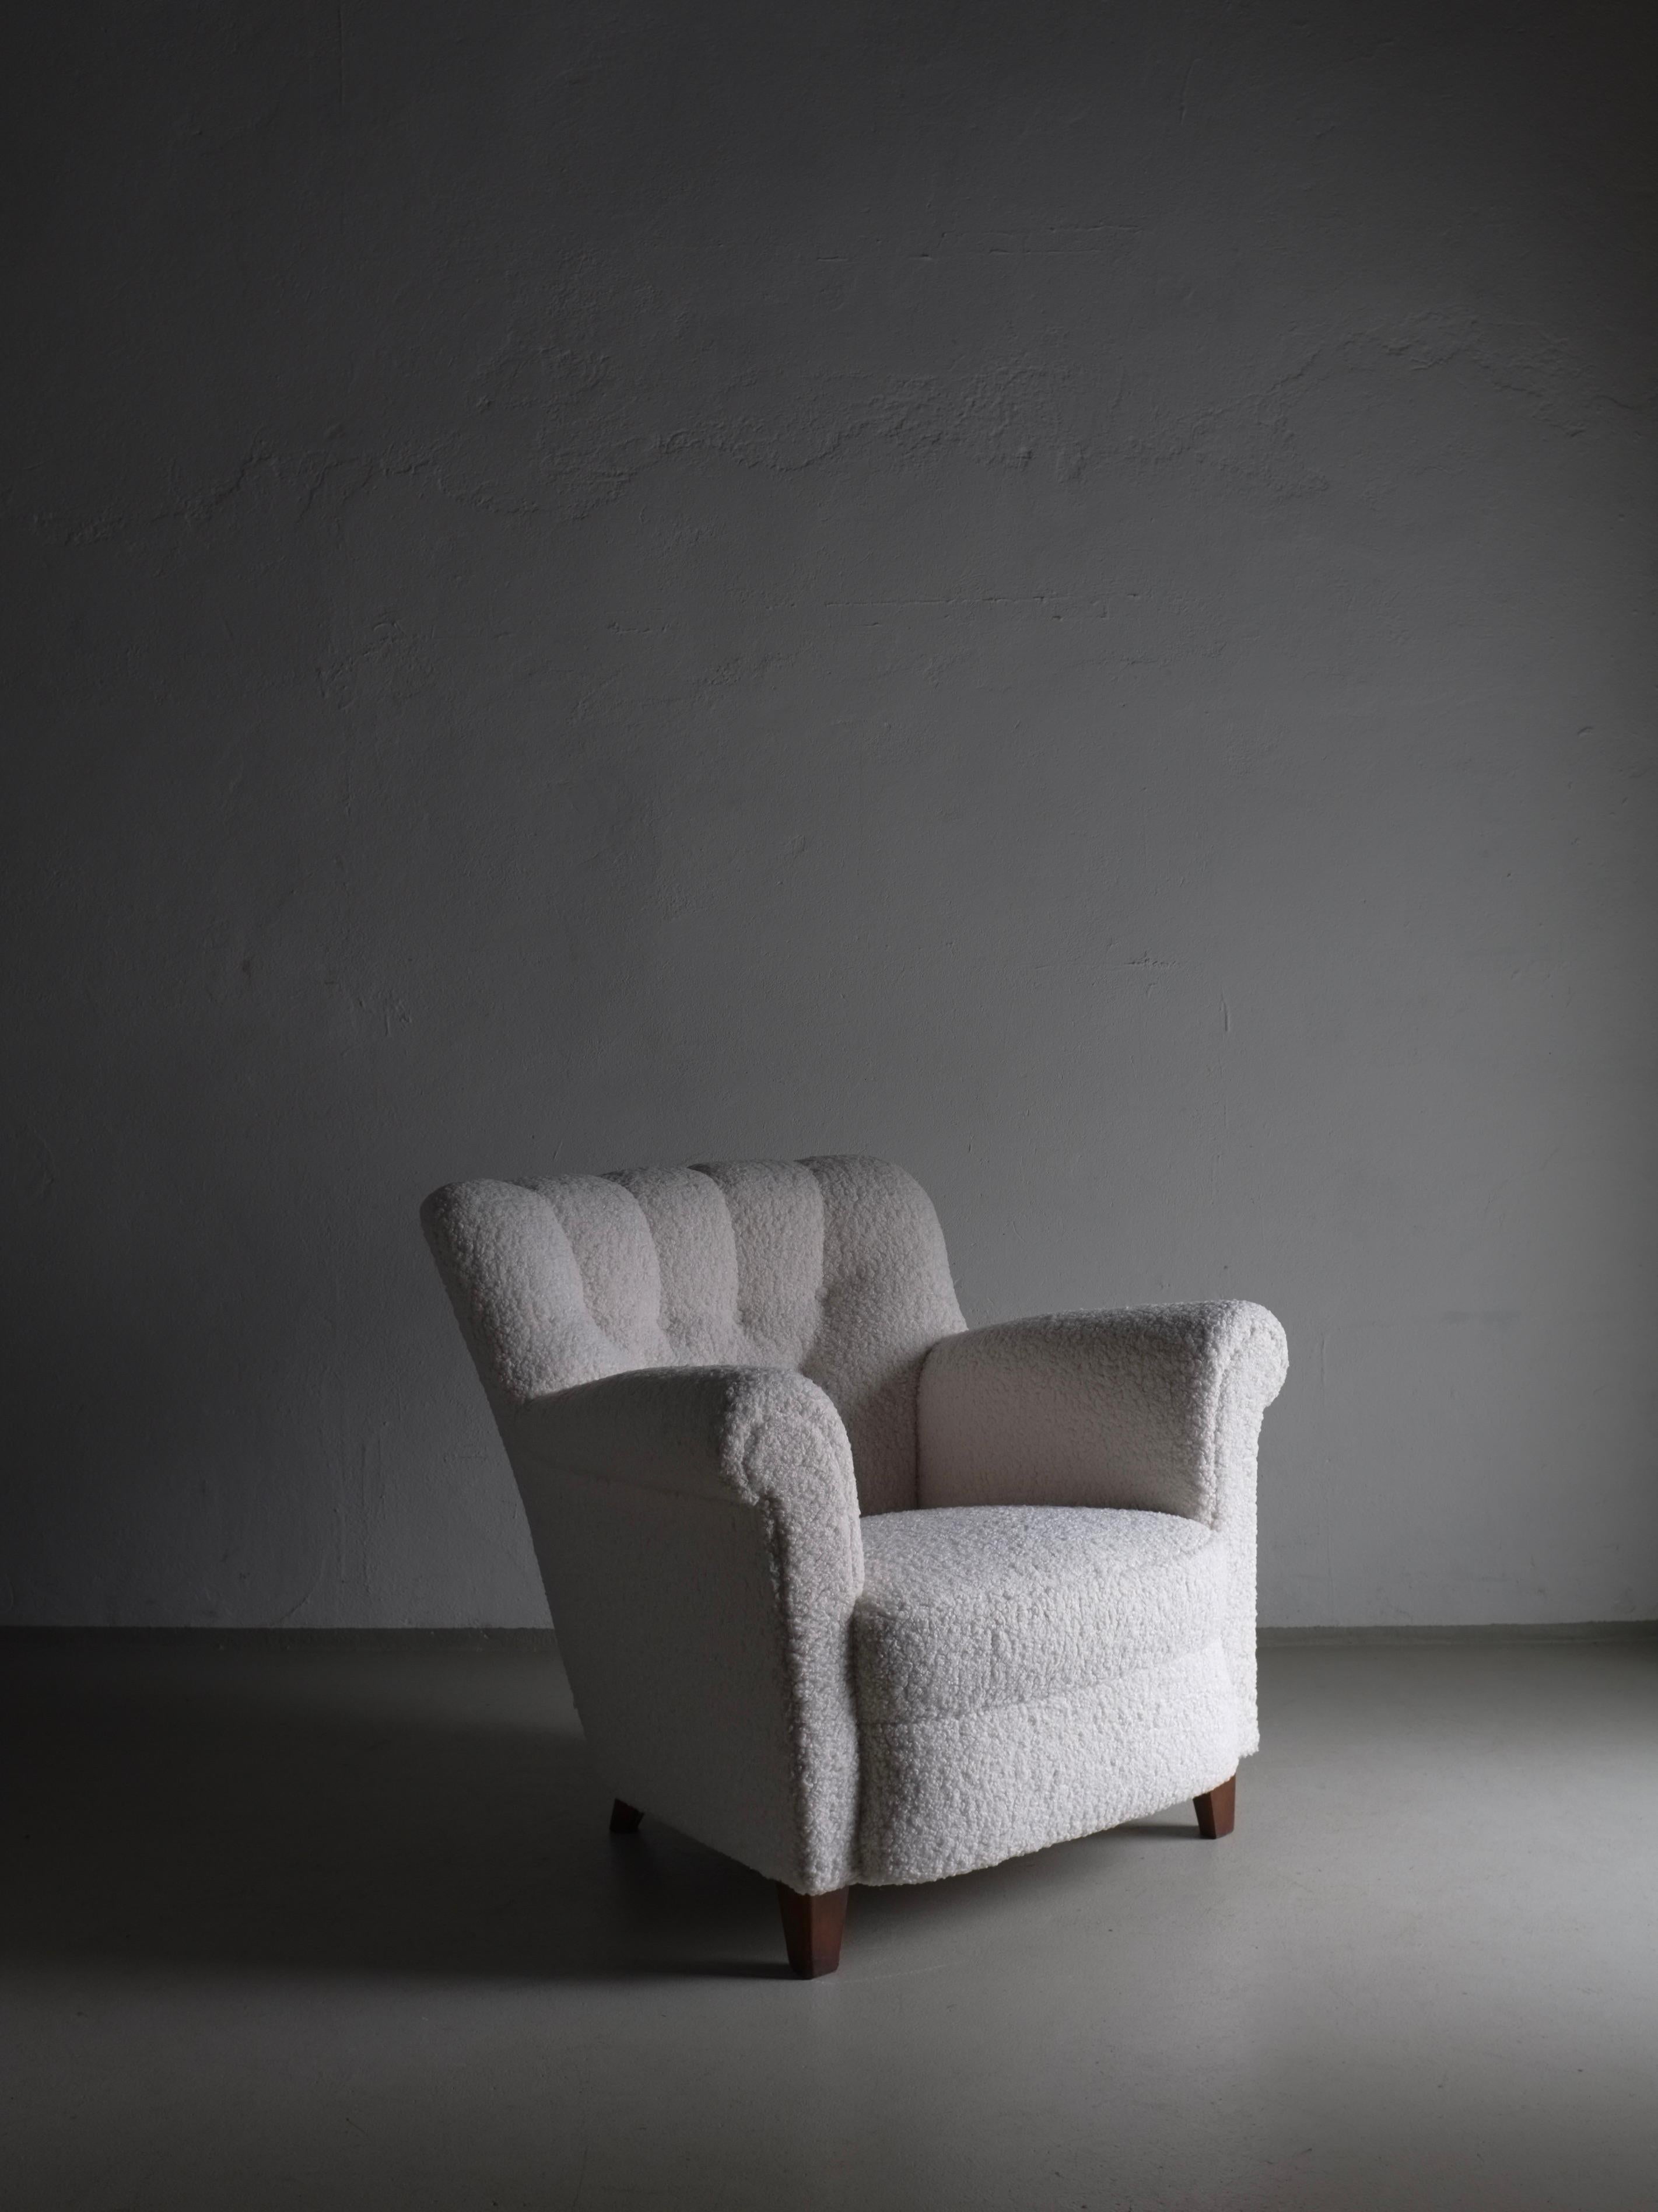 Country White Faux Shearling Lounge Chair, Sweden 1940s For Sale